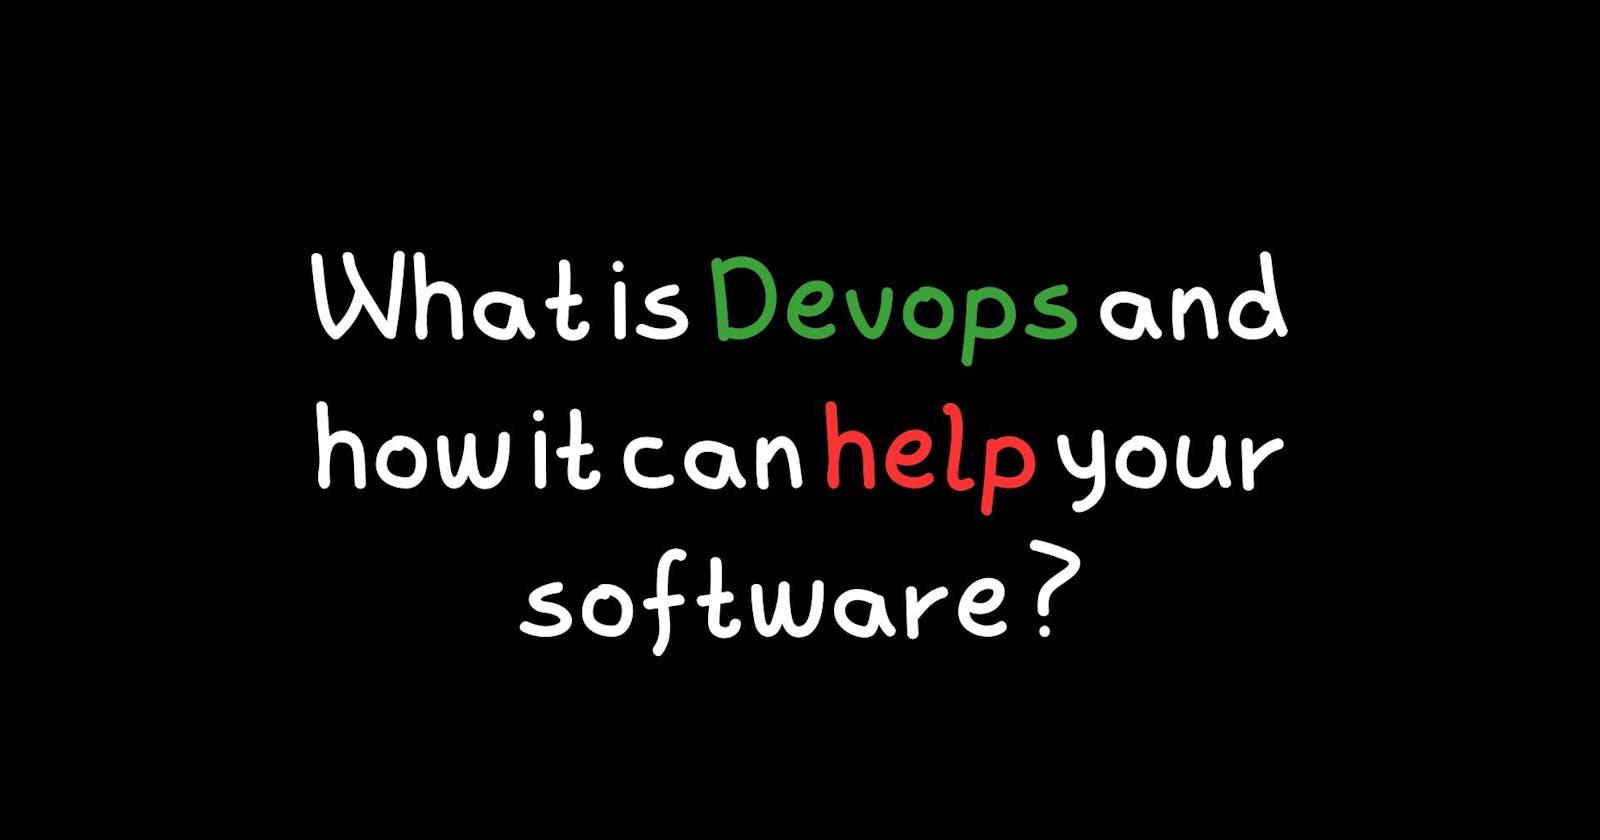 What is Devops and how it can help your software ?